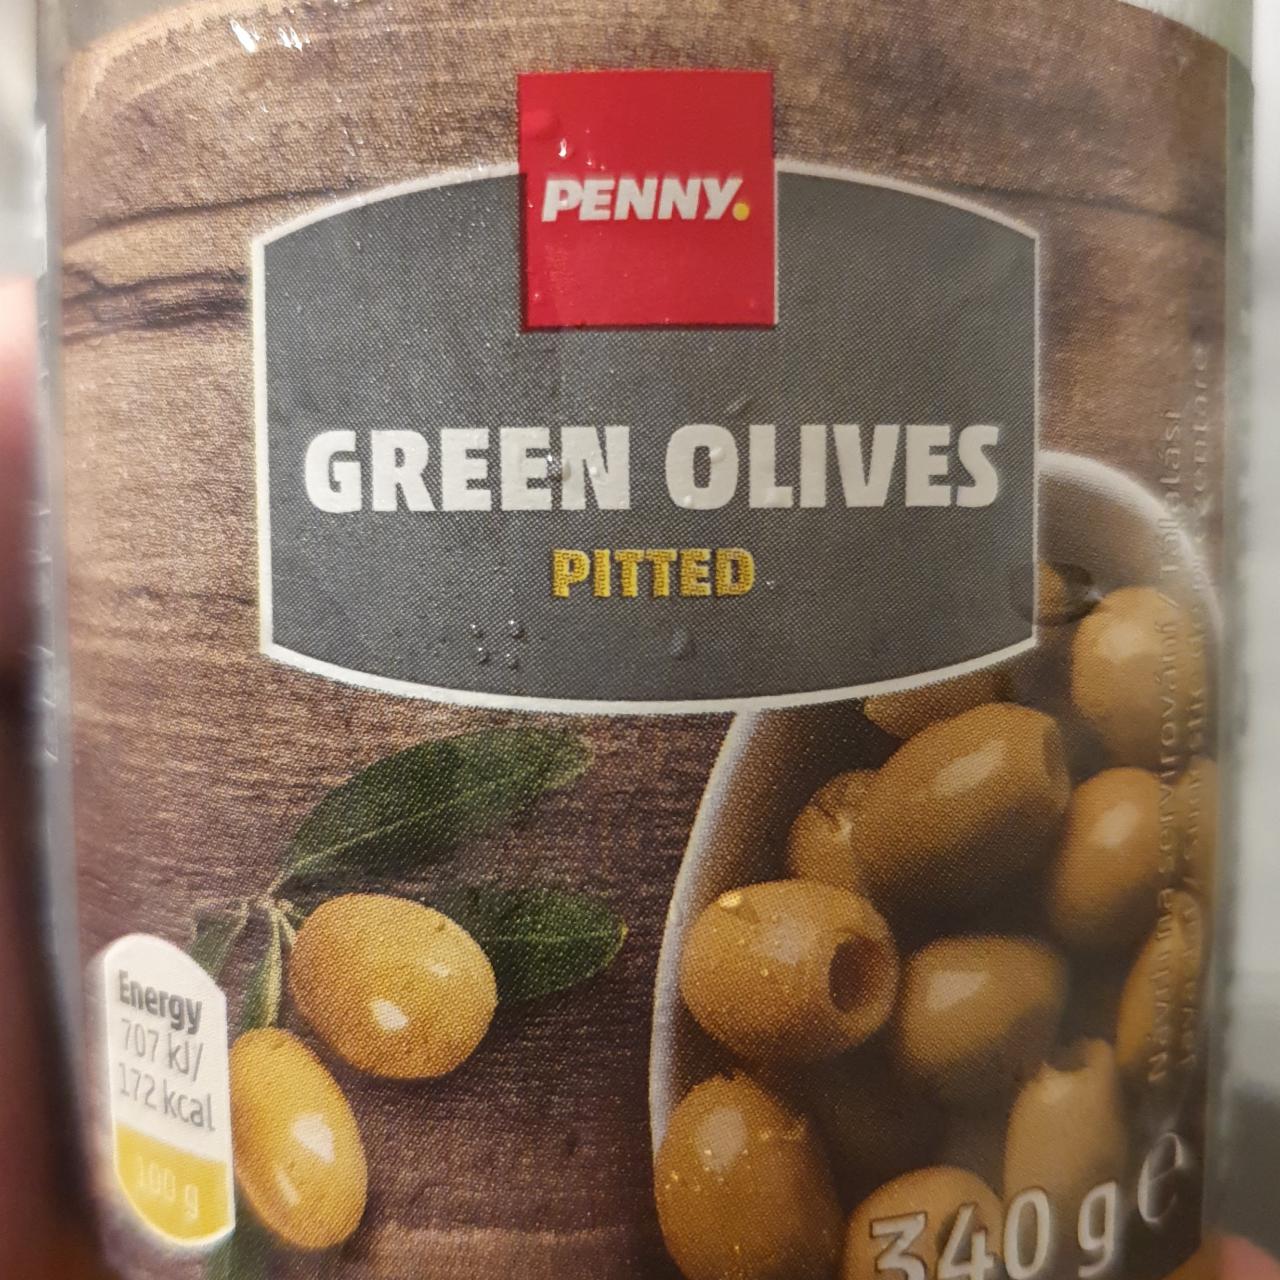 Képek - Green Olives Pitted Penny